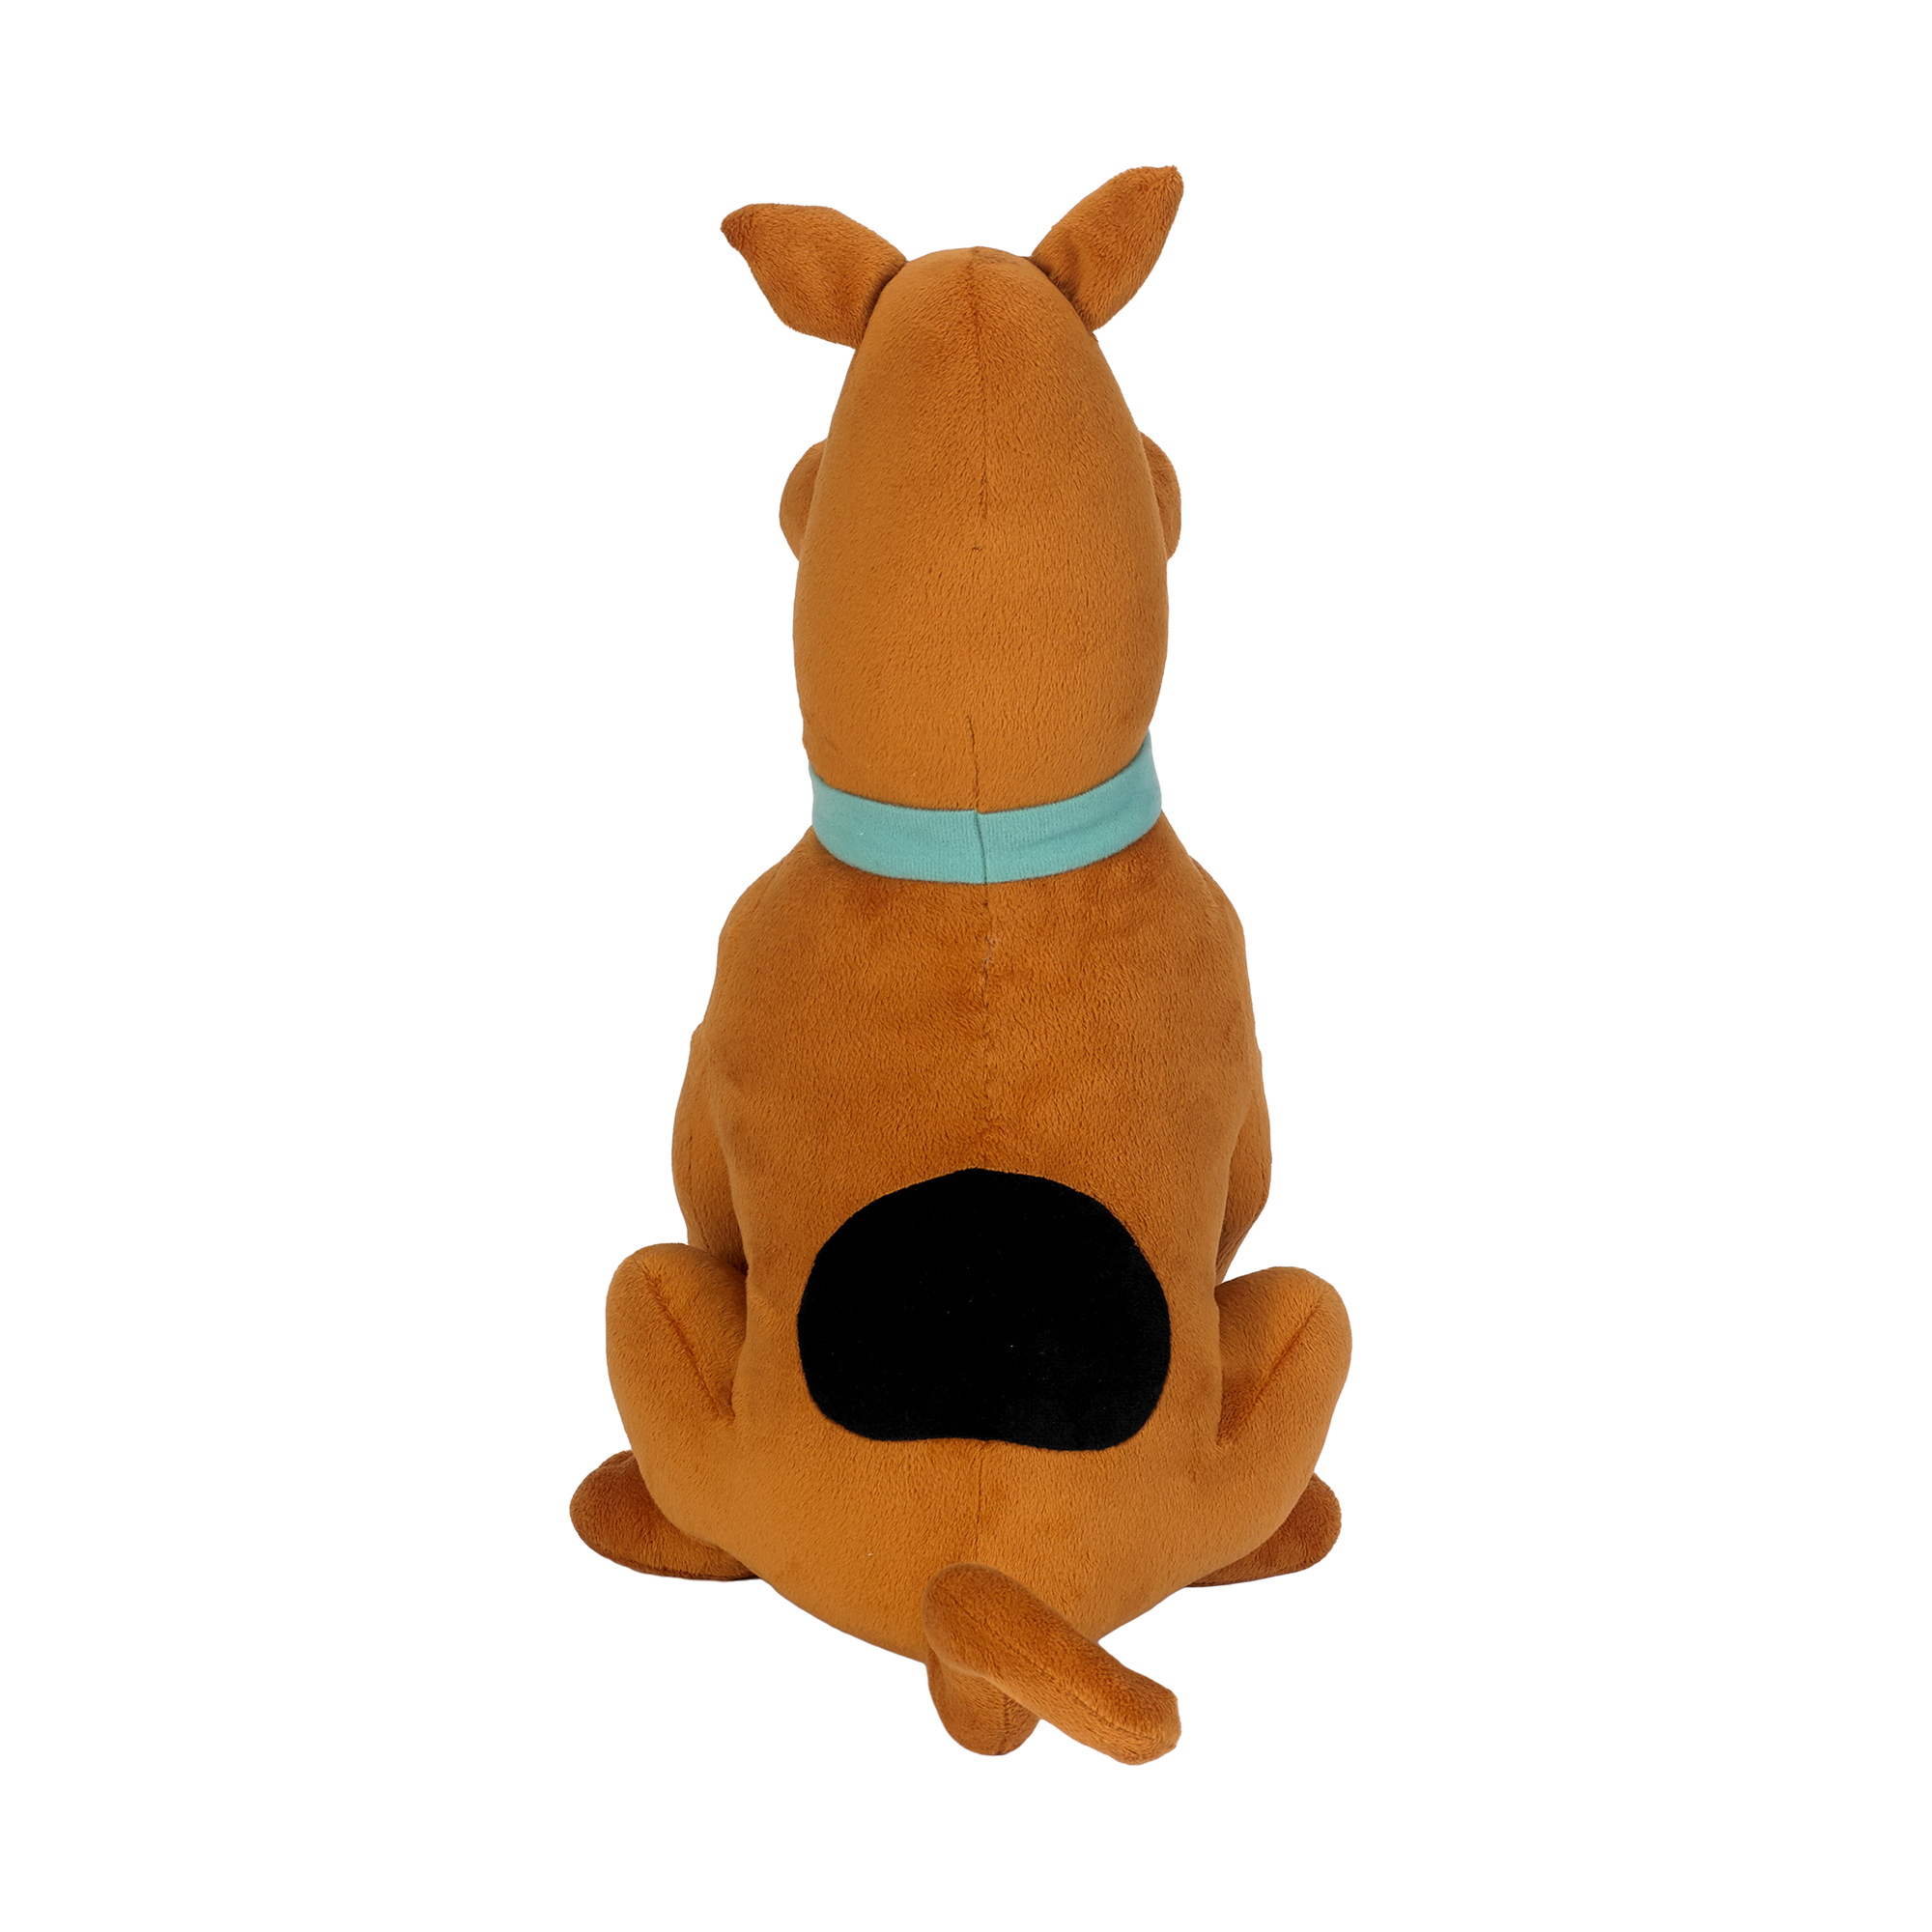 SCOOB! Scooby-Doo Kids Bedding Super Soft Plush Snuggle Cuddle Pillow, Scooby - image 5 of 6